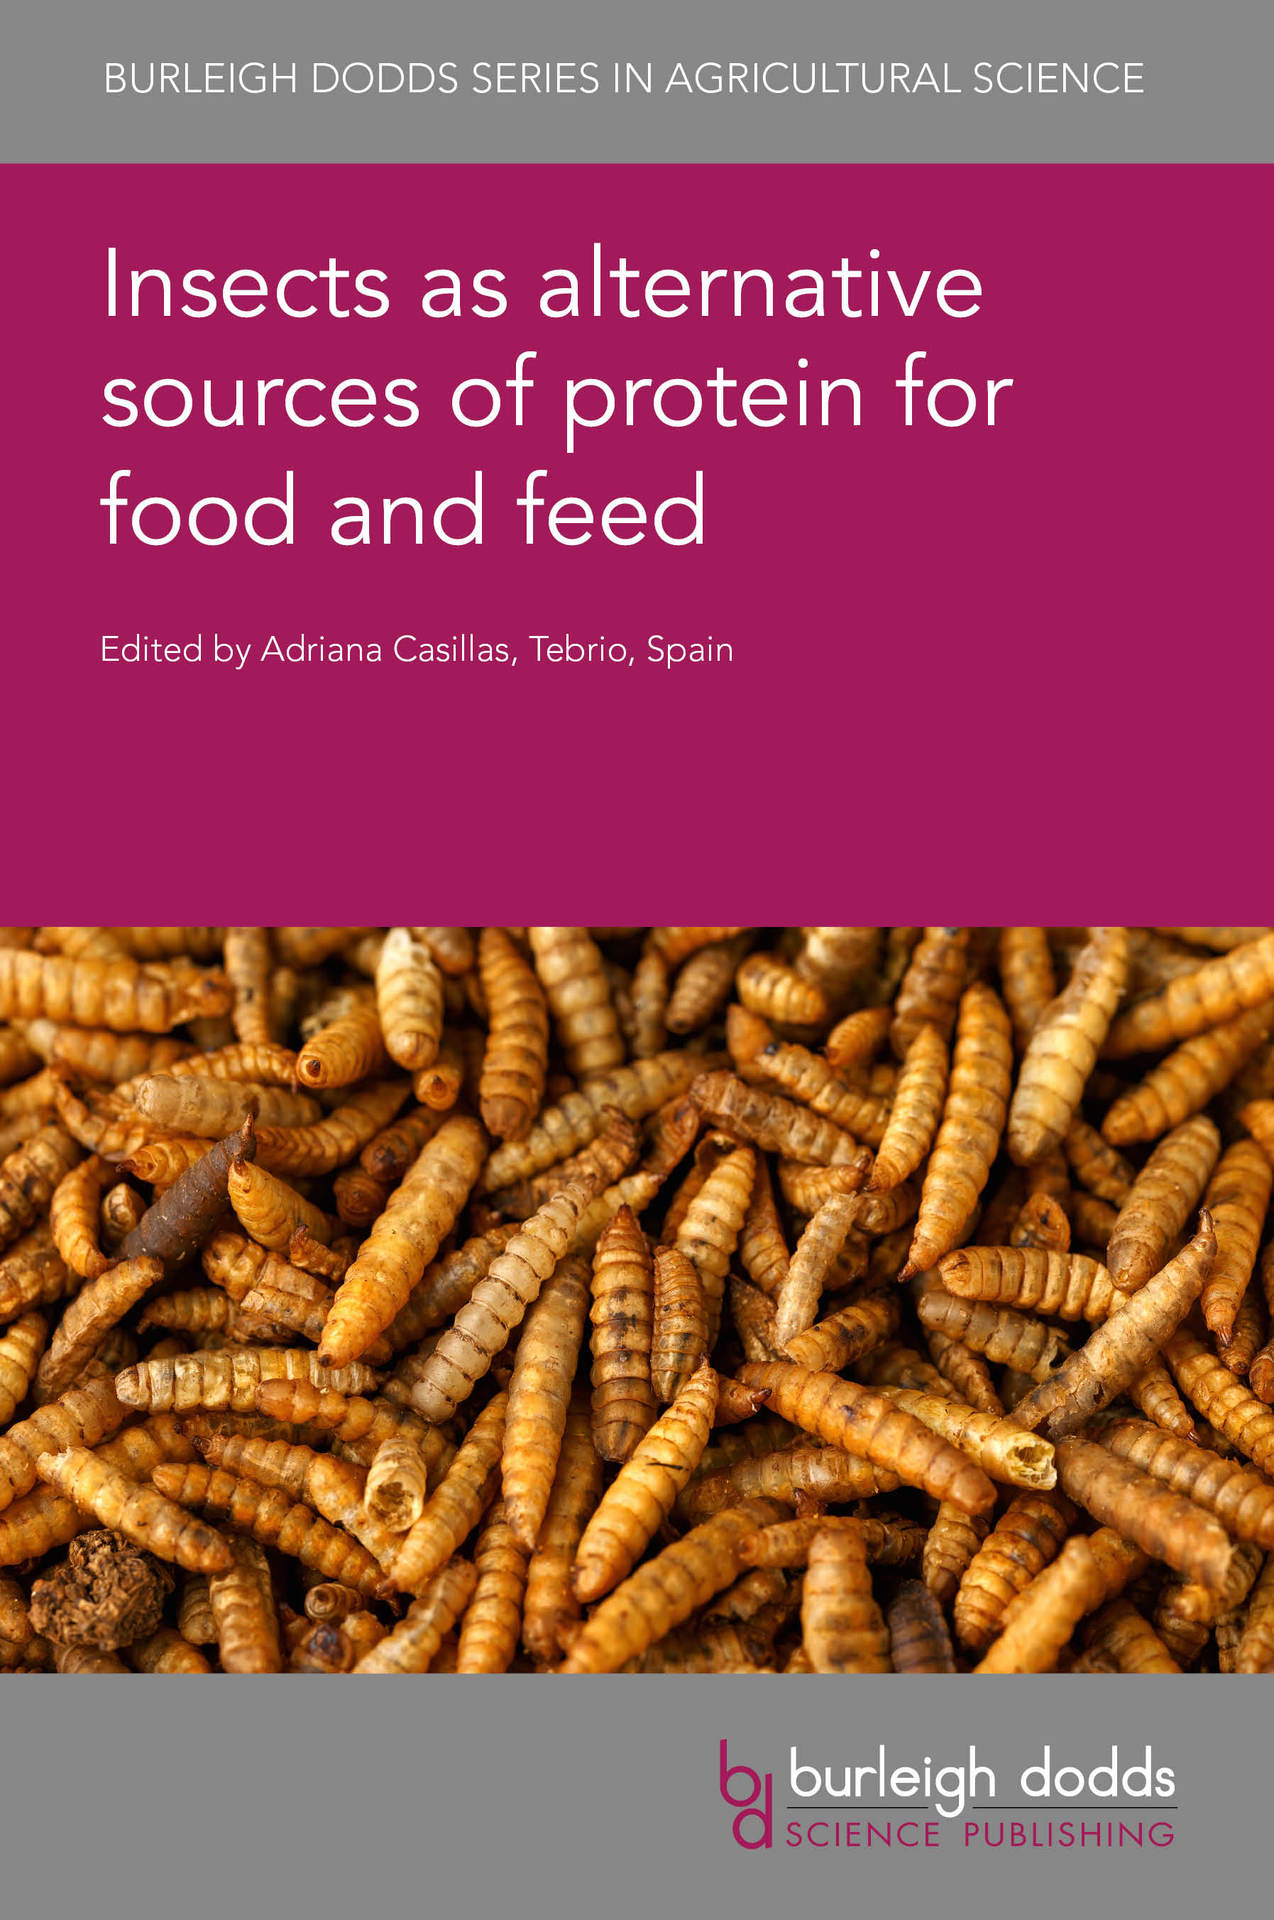 Insects as alternative sources of protein for food and feed